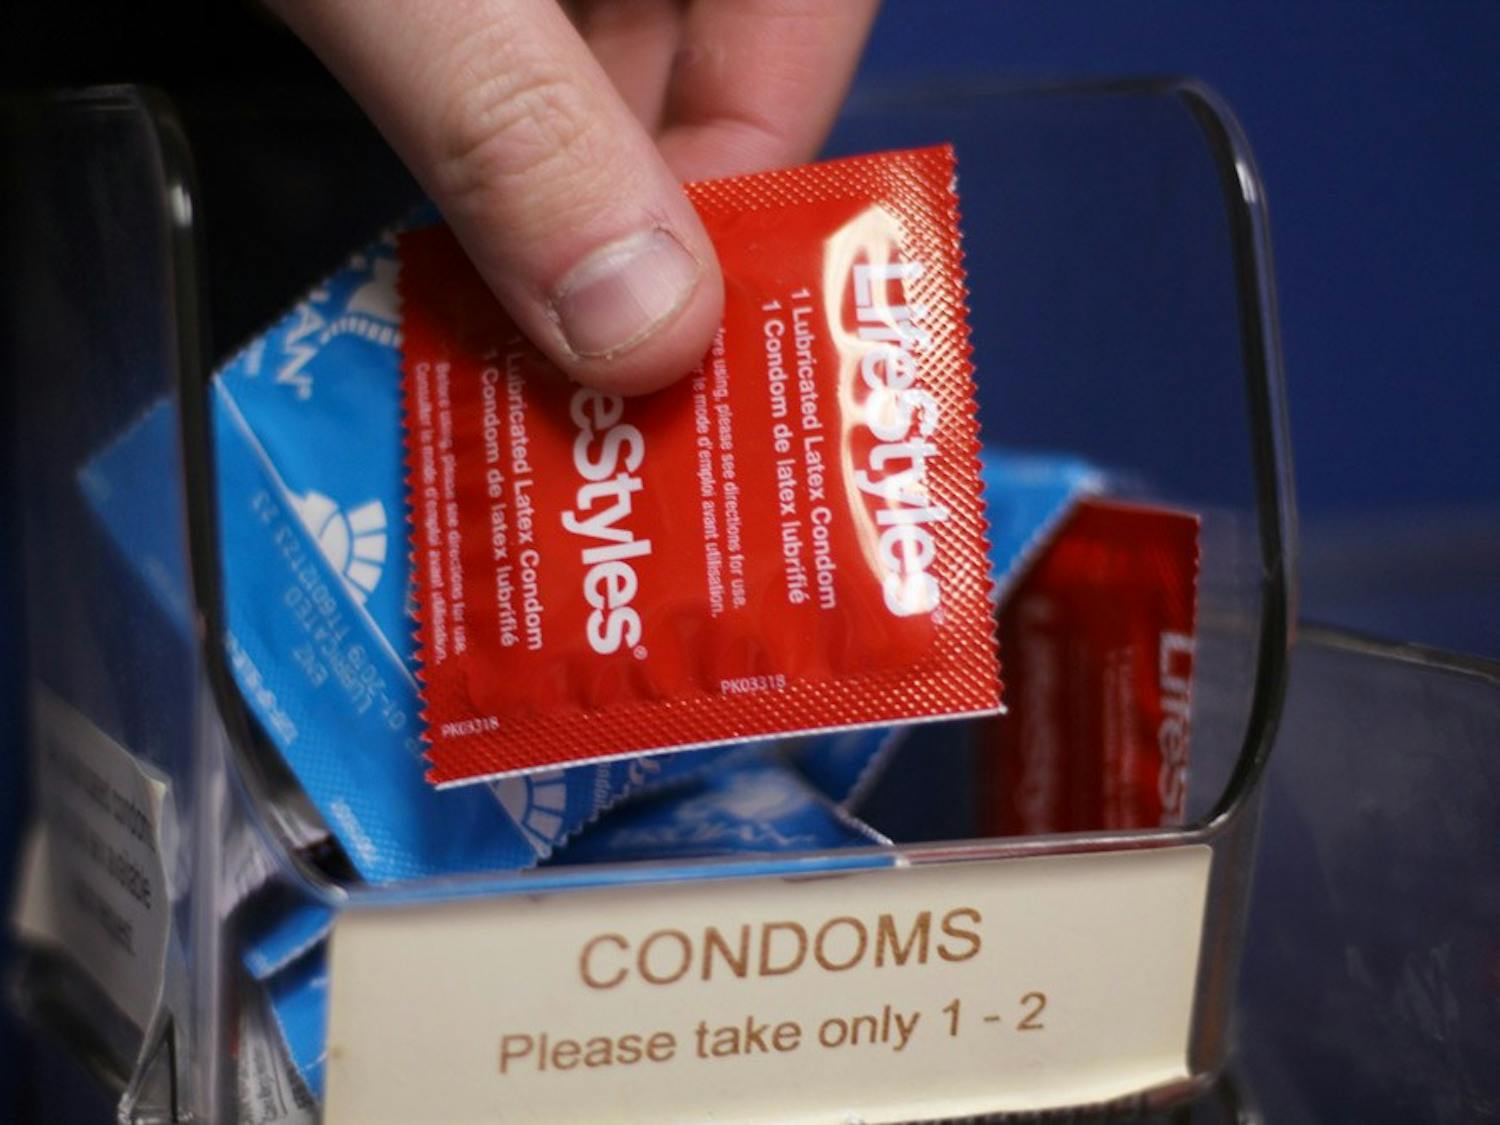 The Wellness Center located in 114 Student Union provides free condoms for students.